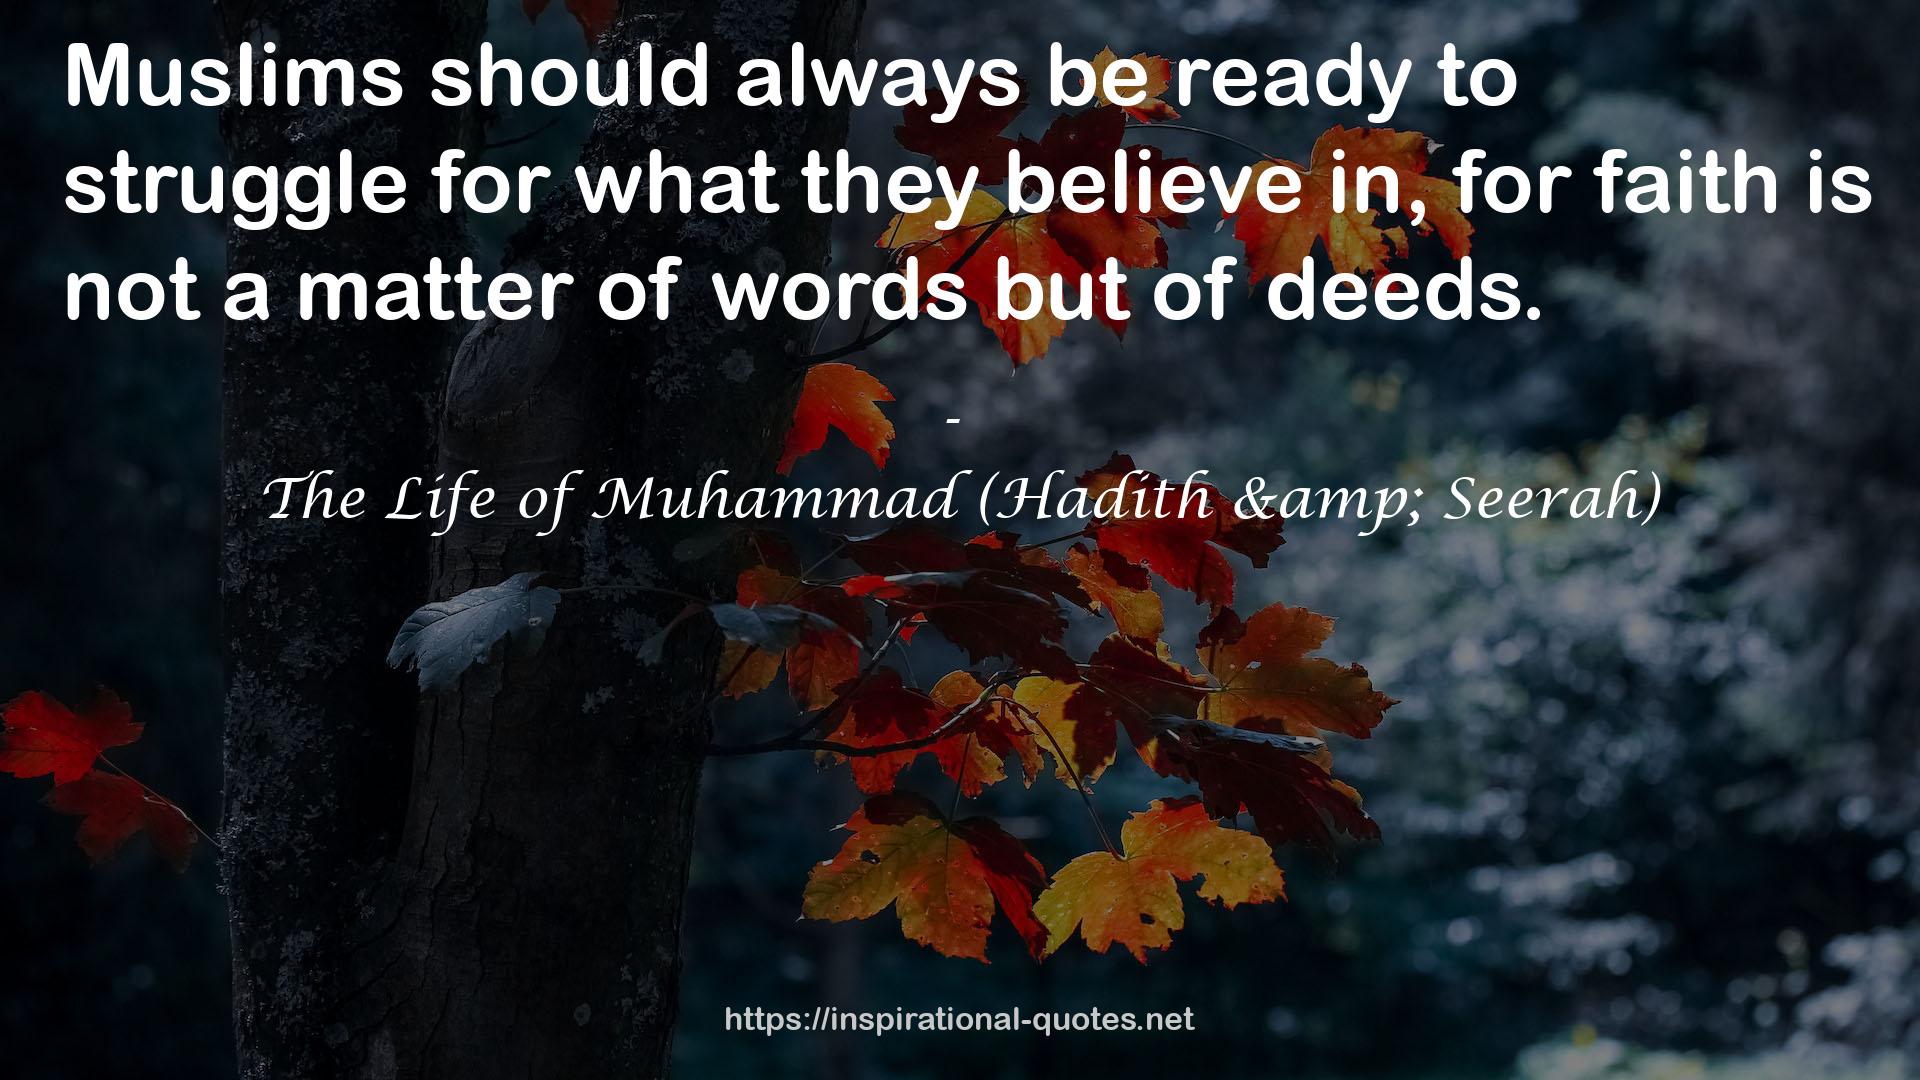 The Life of Muhammad (Hadith & Seerah) QUOTES